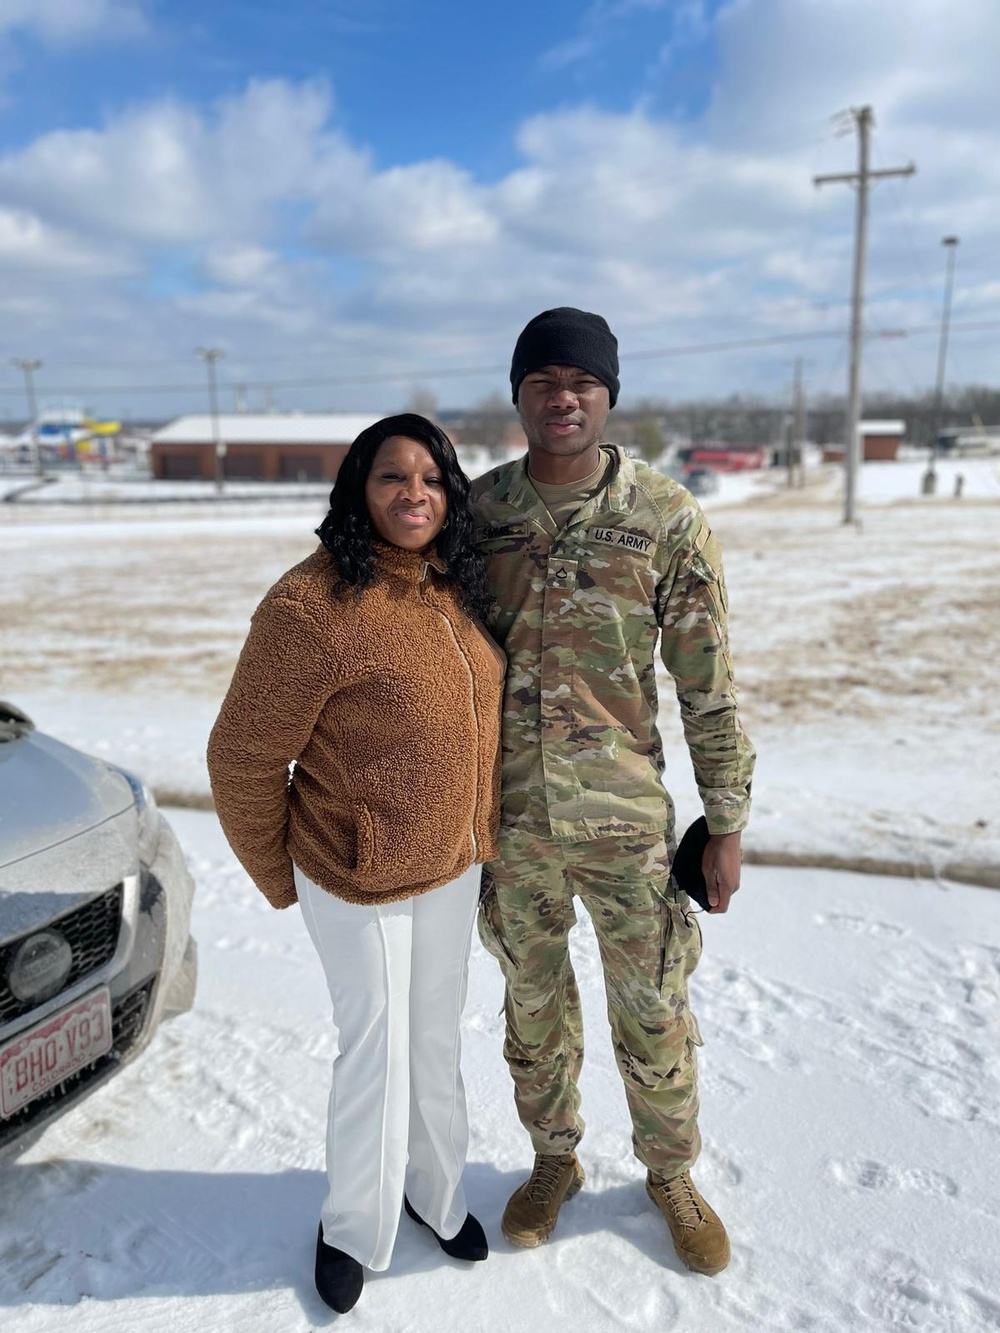 From Jamaica to the U.S. Army